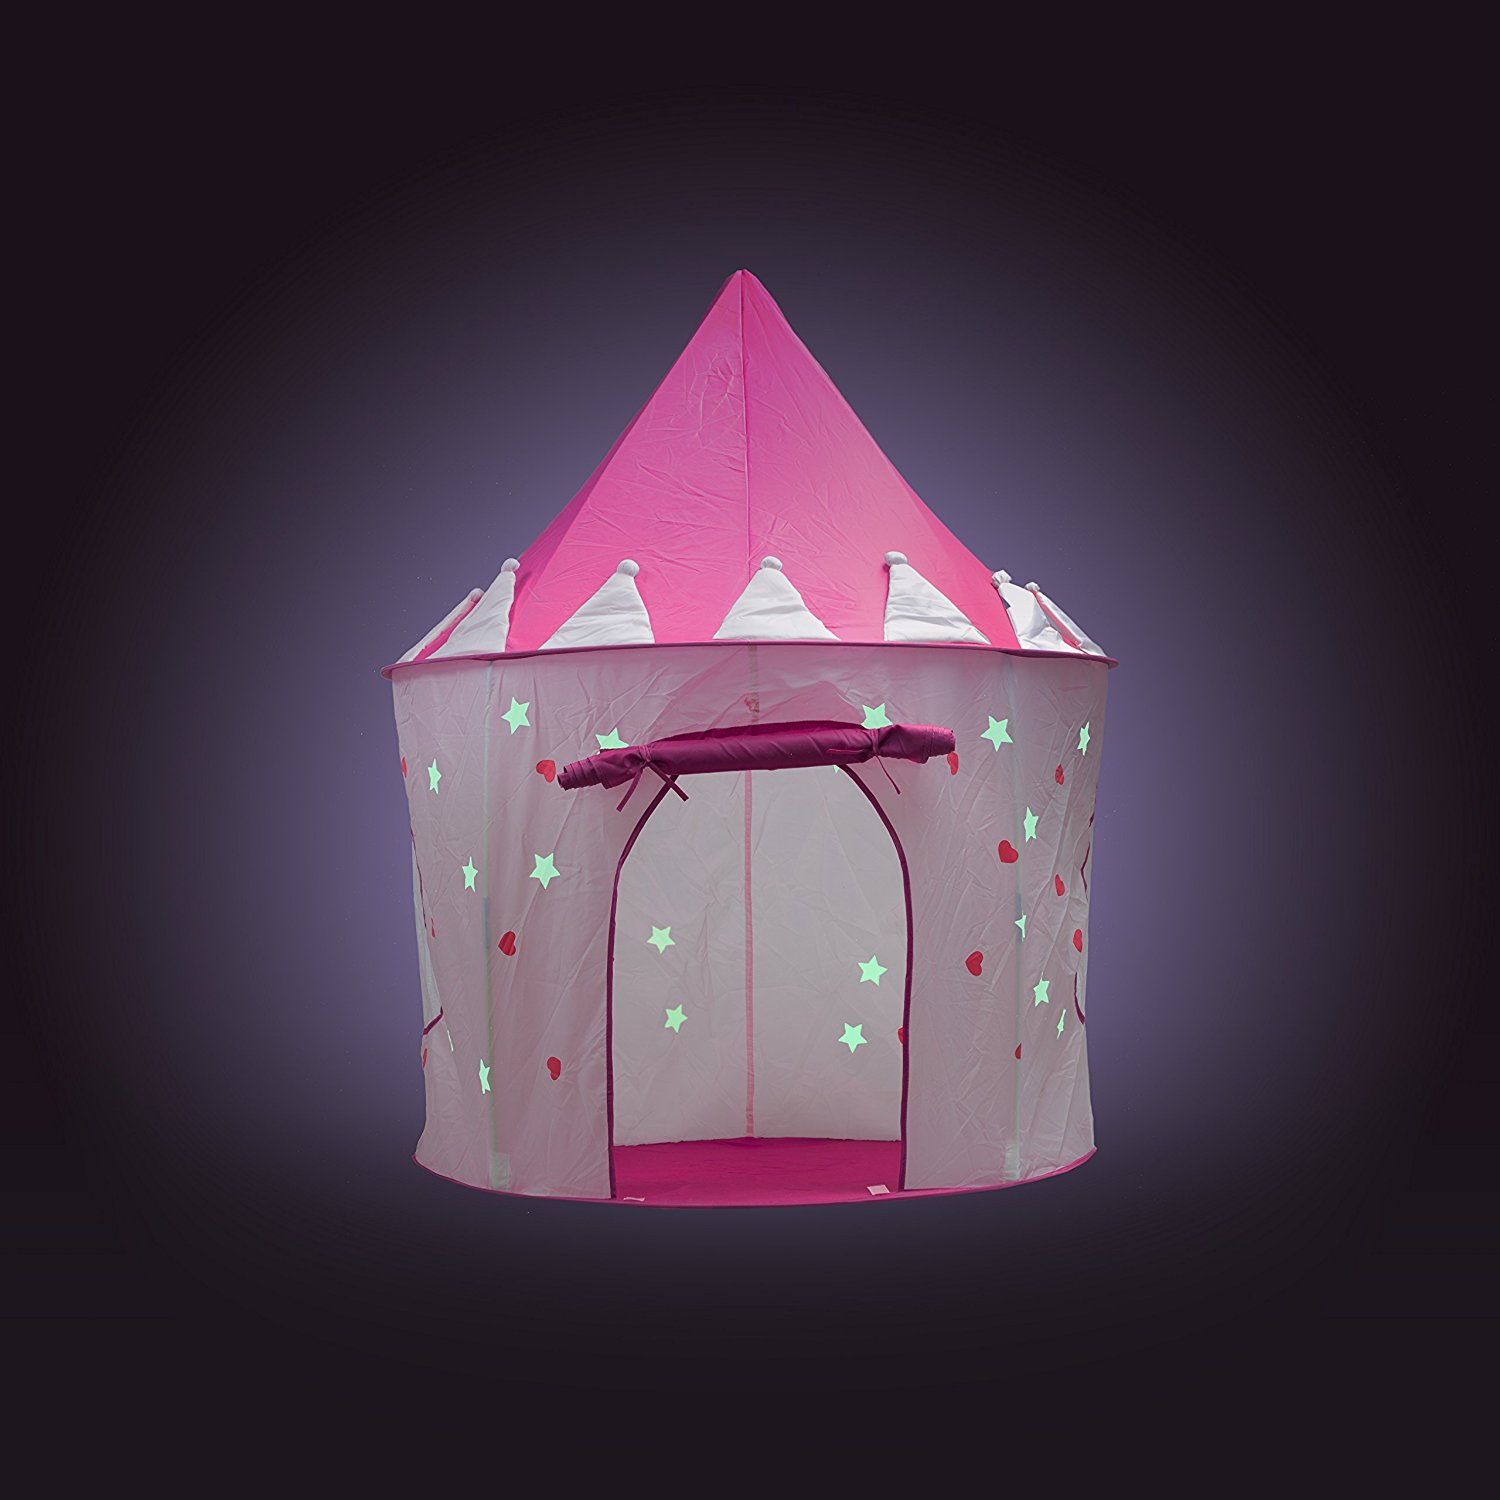 FoxPrint Princess Castle Glow in the Dark Foldable Pop Up Play Tent - image 1 of 5